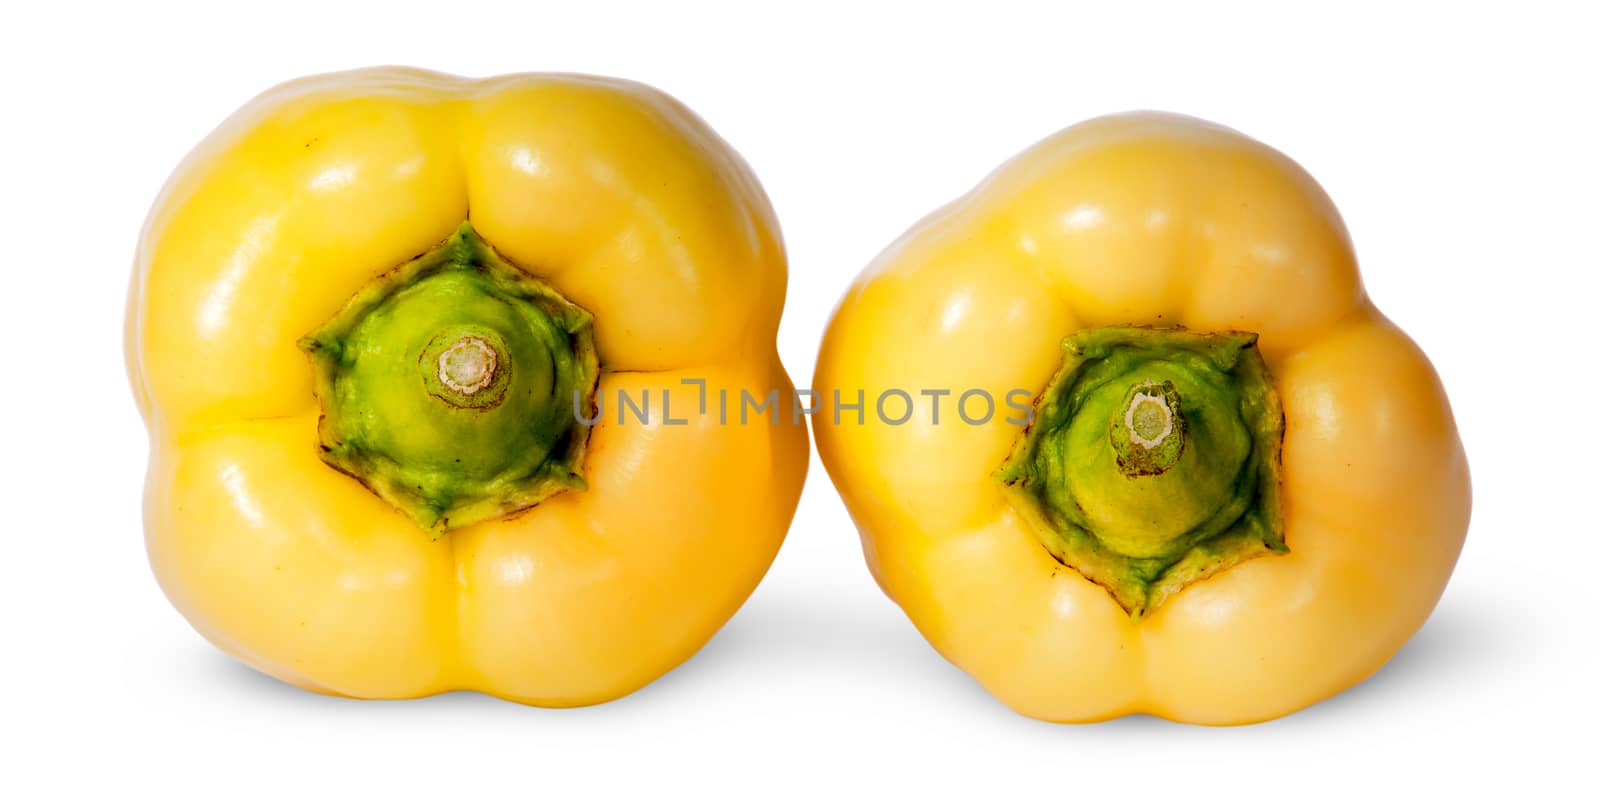 Two yellow bell peppers lying beside isolated on white background